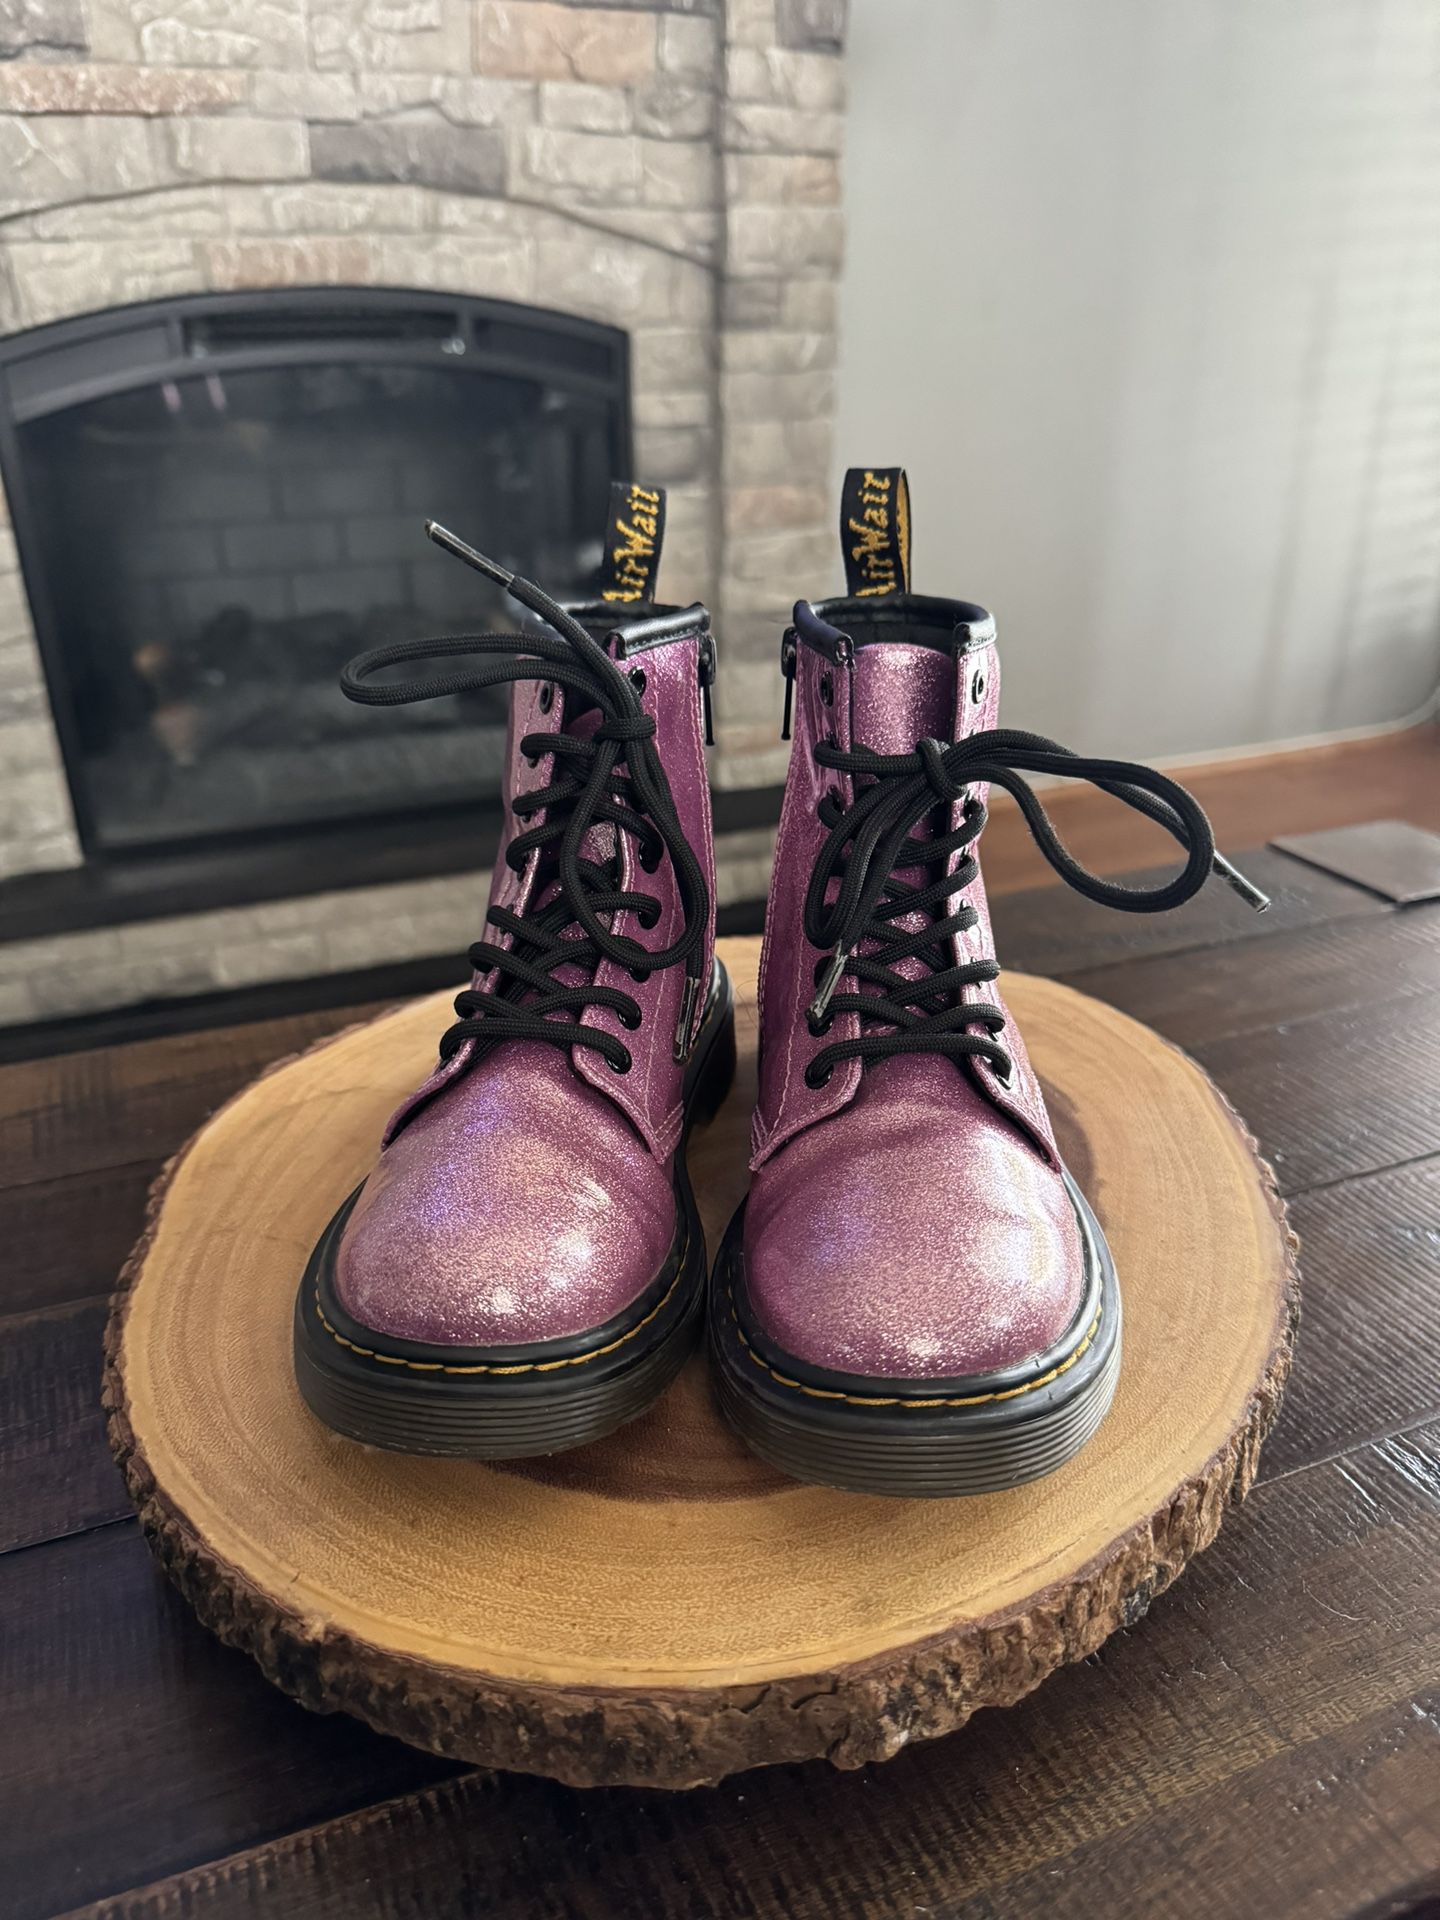 Dr. Martens 1460 8-Eye Glitter Boots. Size 13. Little girls. Color Pink glitter. Great condition. 